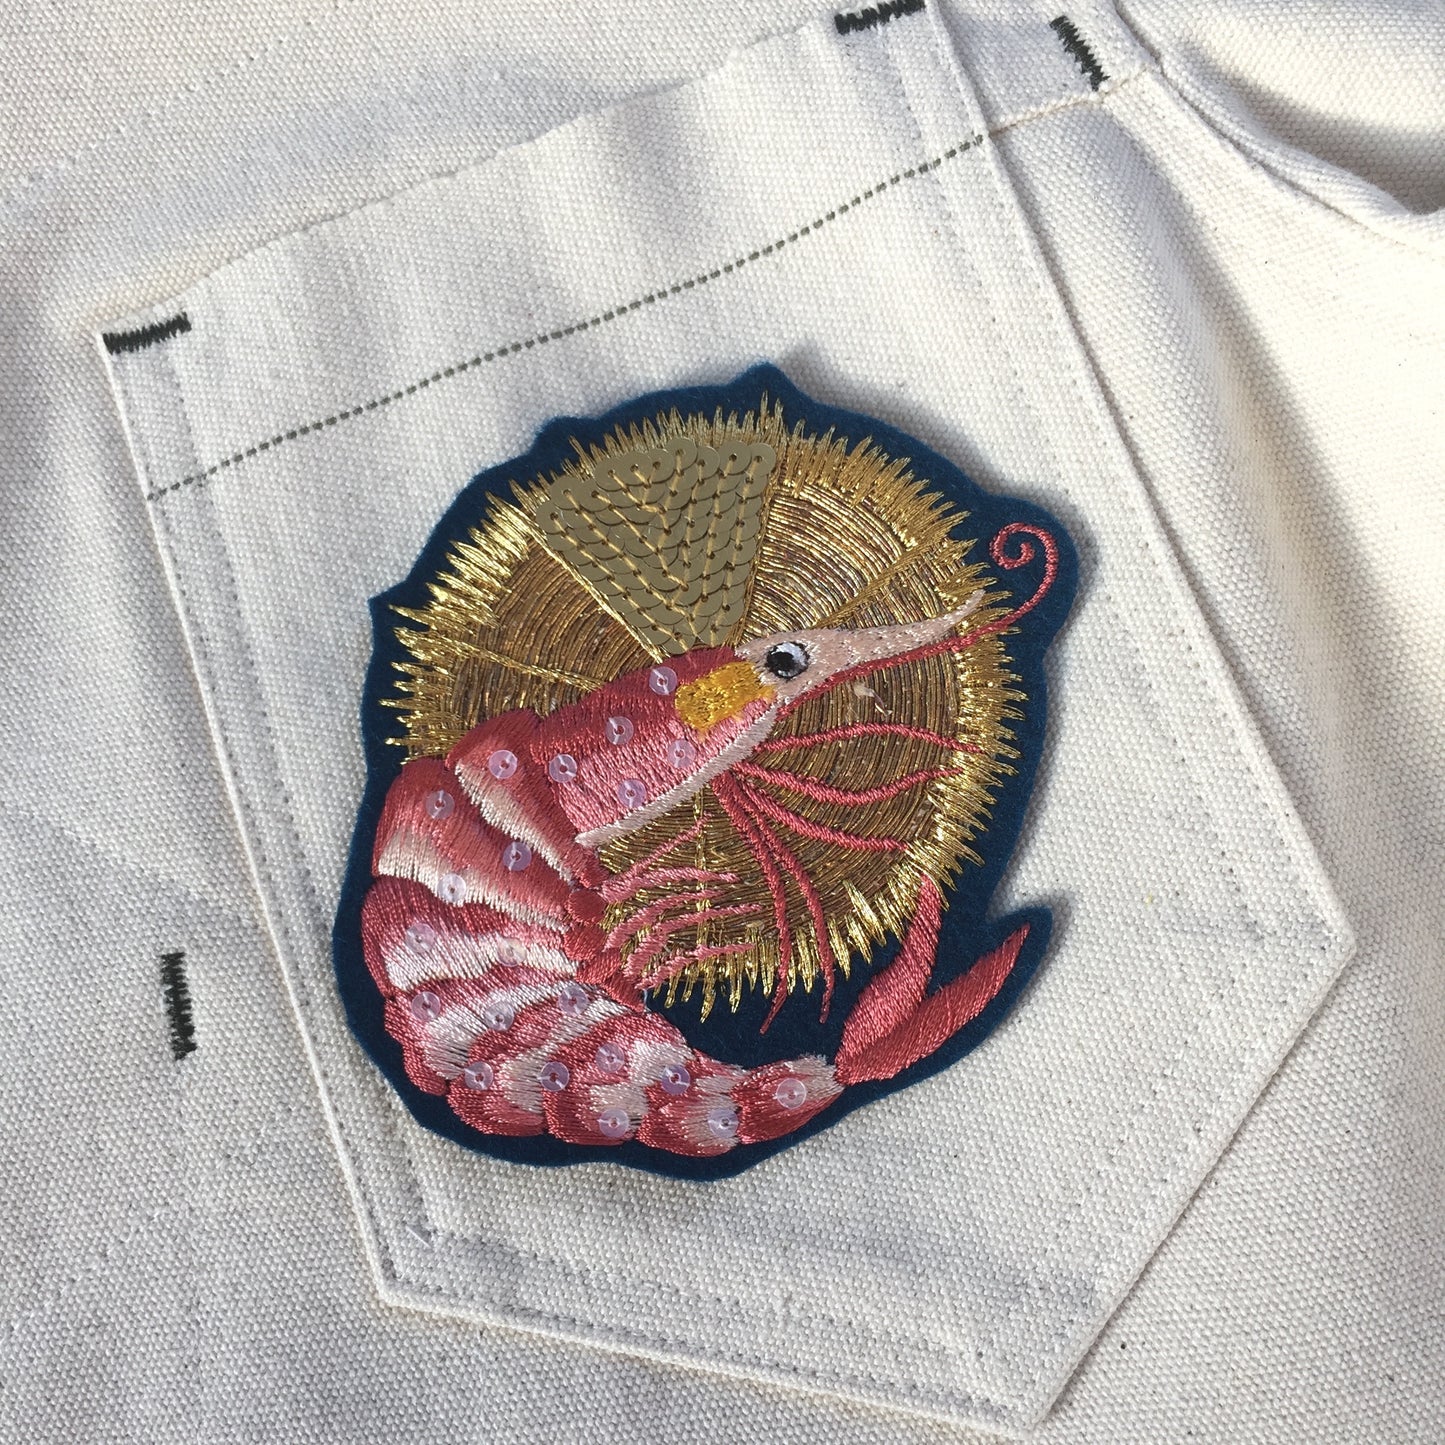 Close-up of luxe embroidered king prawn patch on pocket of white deninm jacket